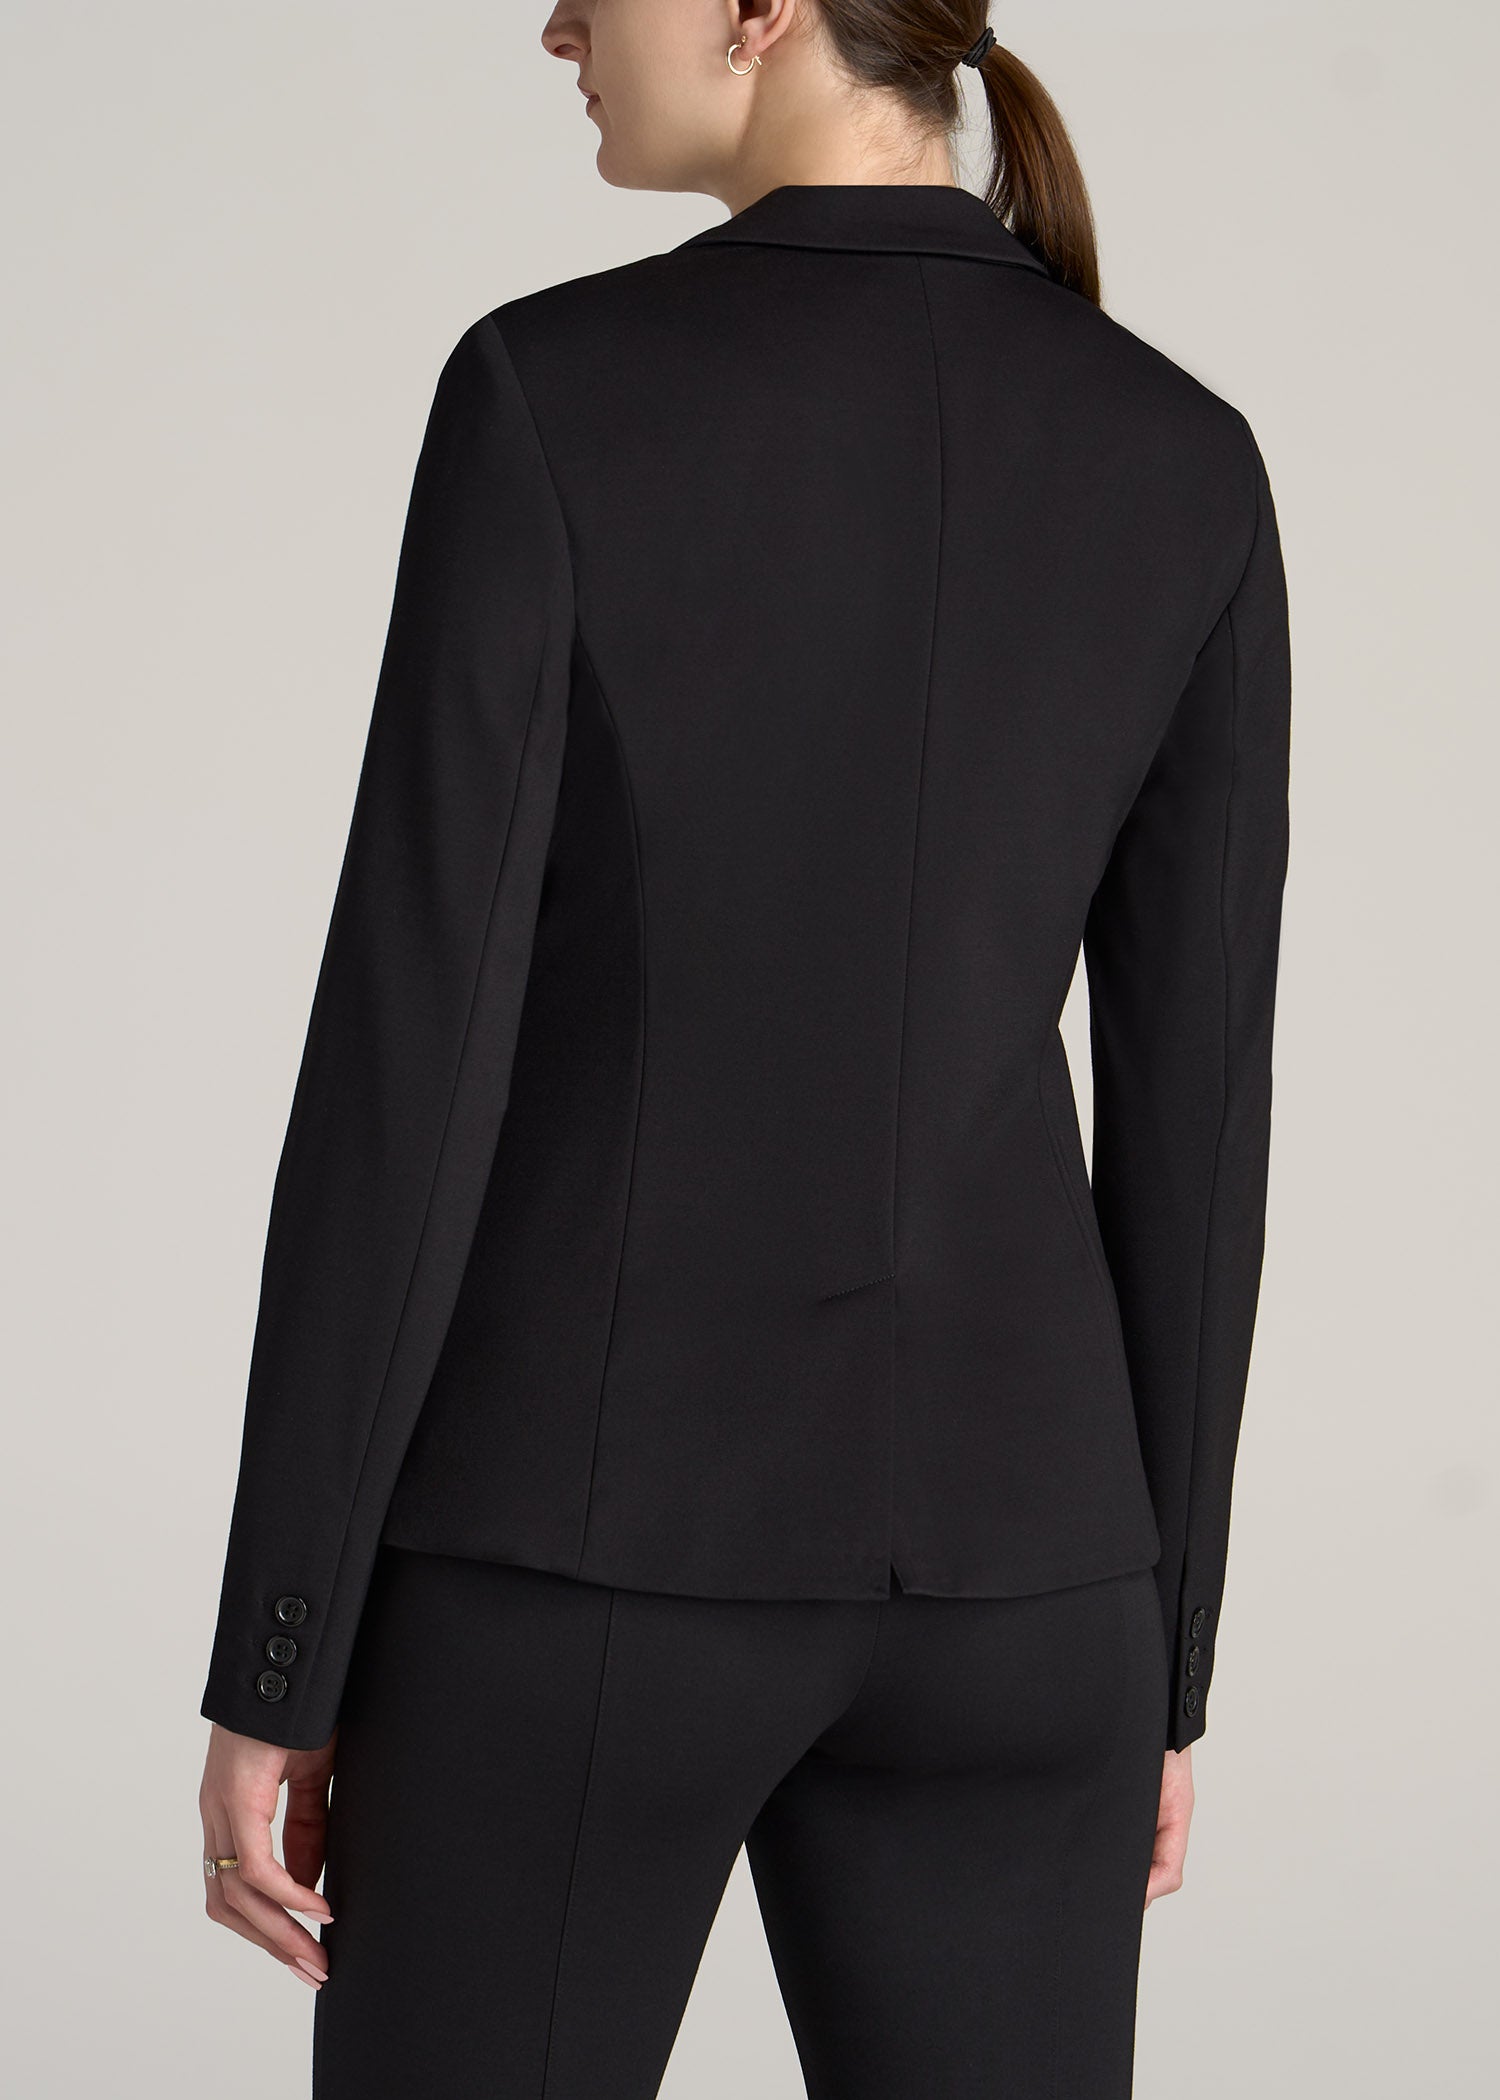 Buy Black Pantsuit for Business Women, Tall Women Pants and Blazer